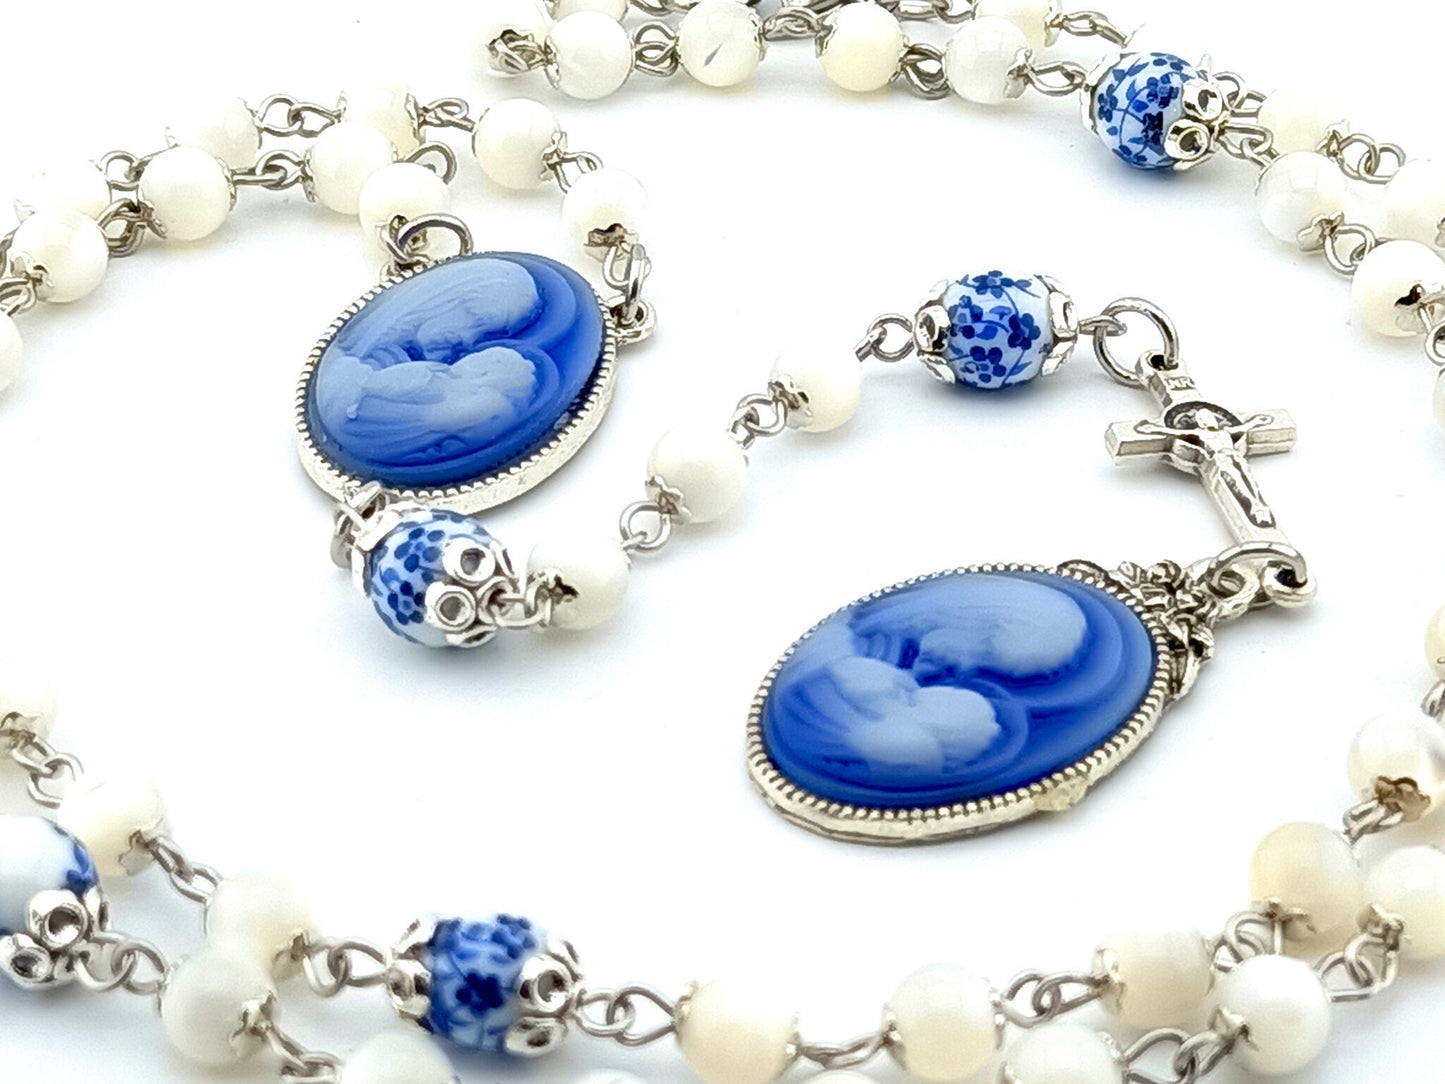 Virgin Mary and Child unique rosary beads with mother of pearl and porcelain beads, silver small linking crucifix, blue and white cameo centre medal and end medal.